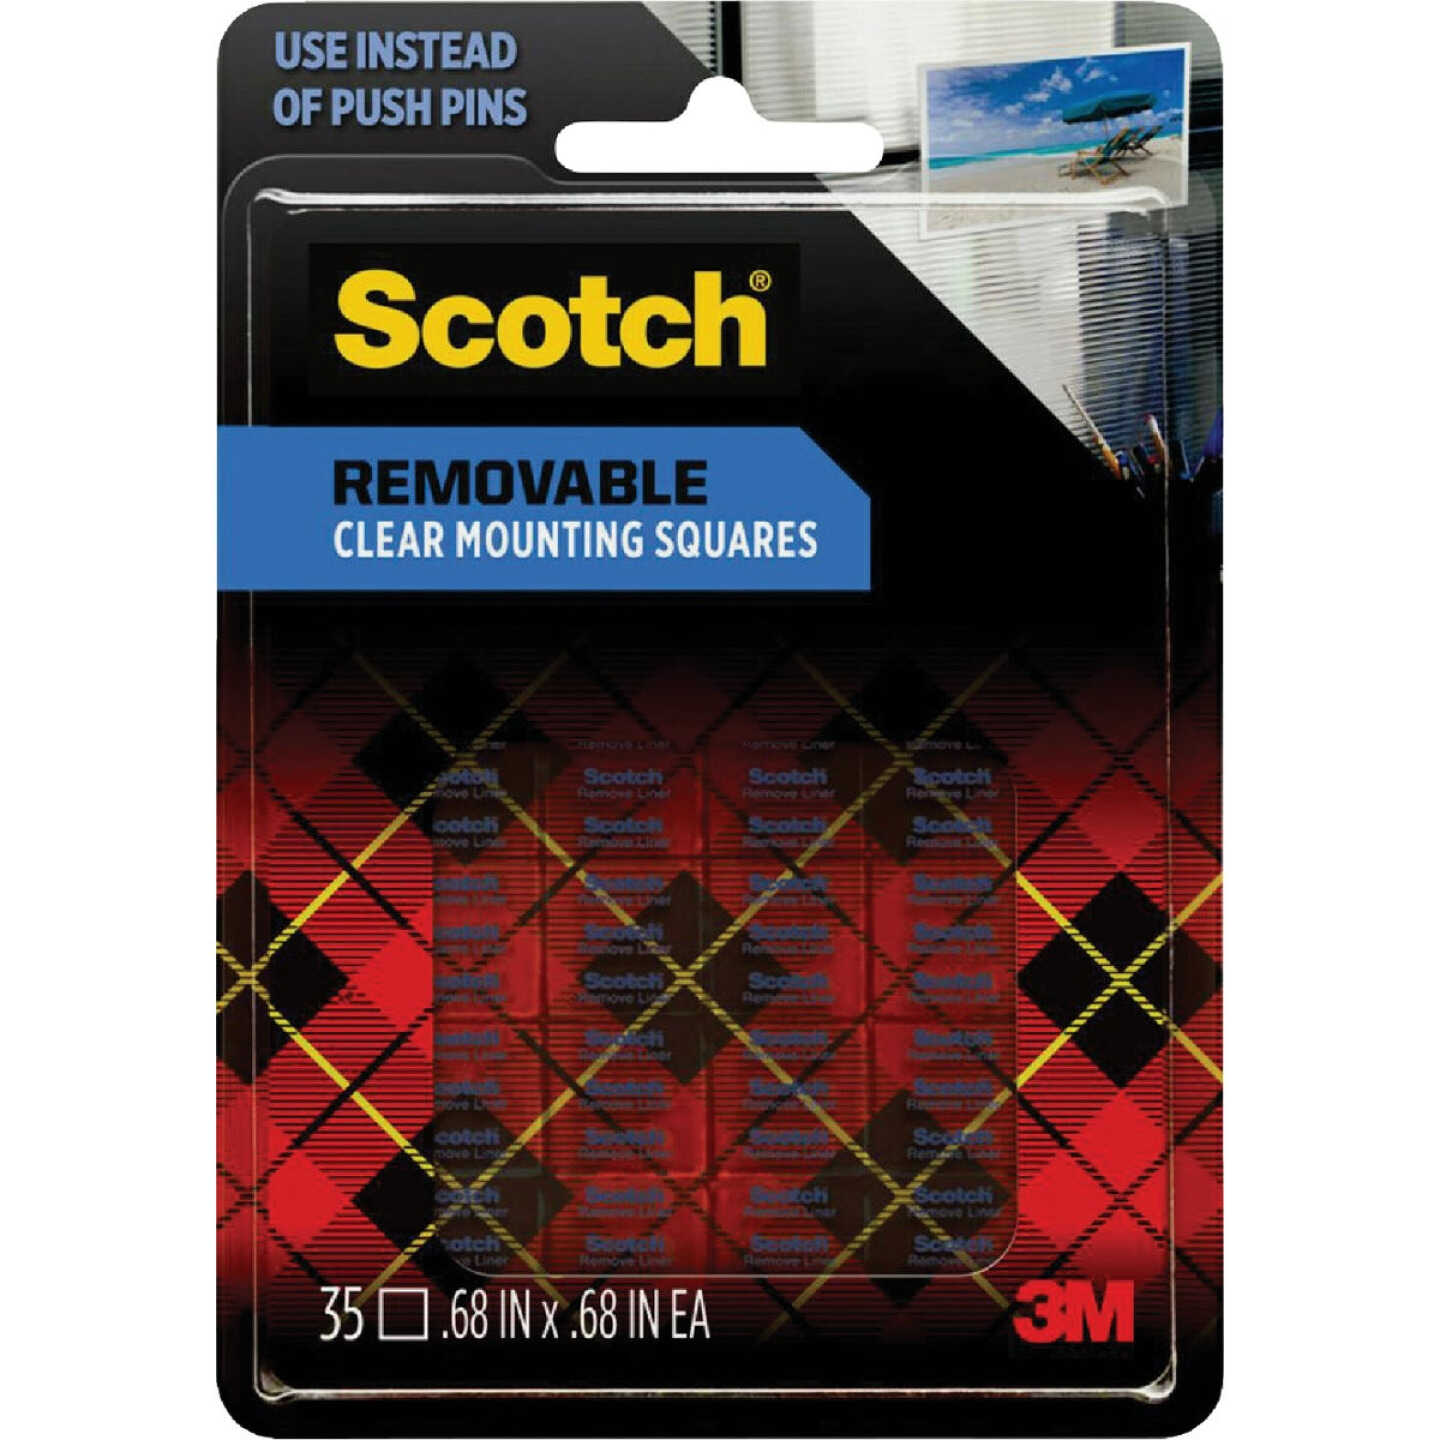 Scotch 0.68 In. x 0.68 In. 1 Lb. Capacity Removable Mounting Squares  (35-Pack) - Parker's Building Supply